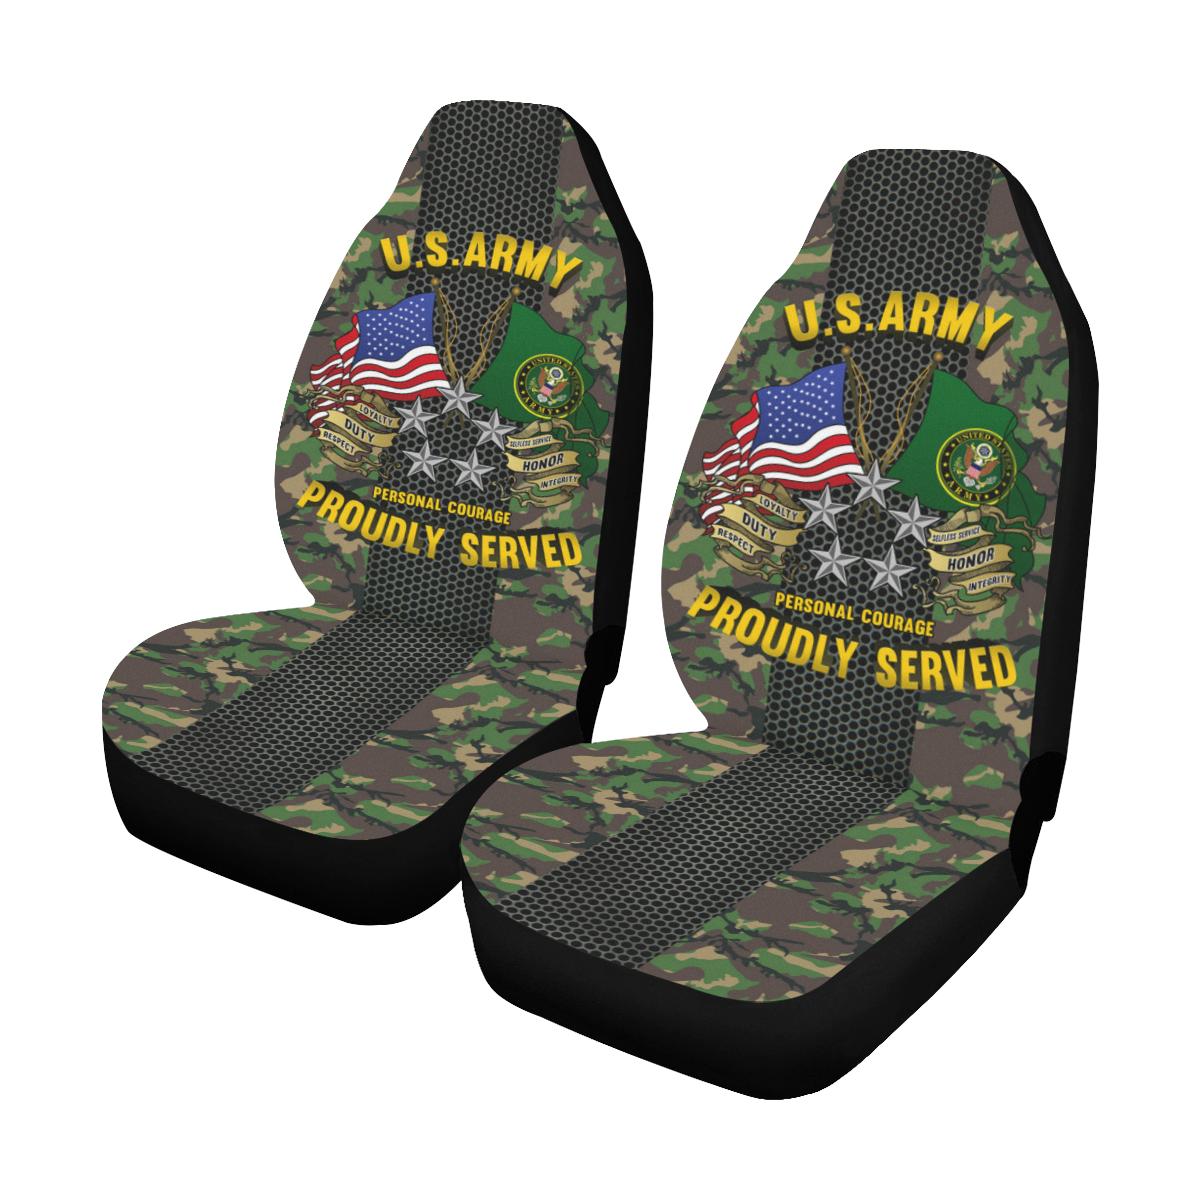 US Army O-10 General of the Army O10 GA General Officer Car Seat Covers (Set of 2)-SeatCovers-Army-Ranks-Veterans Nation